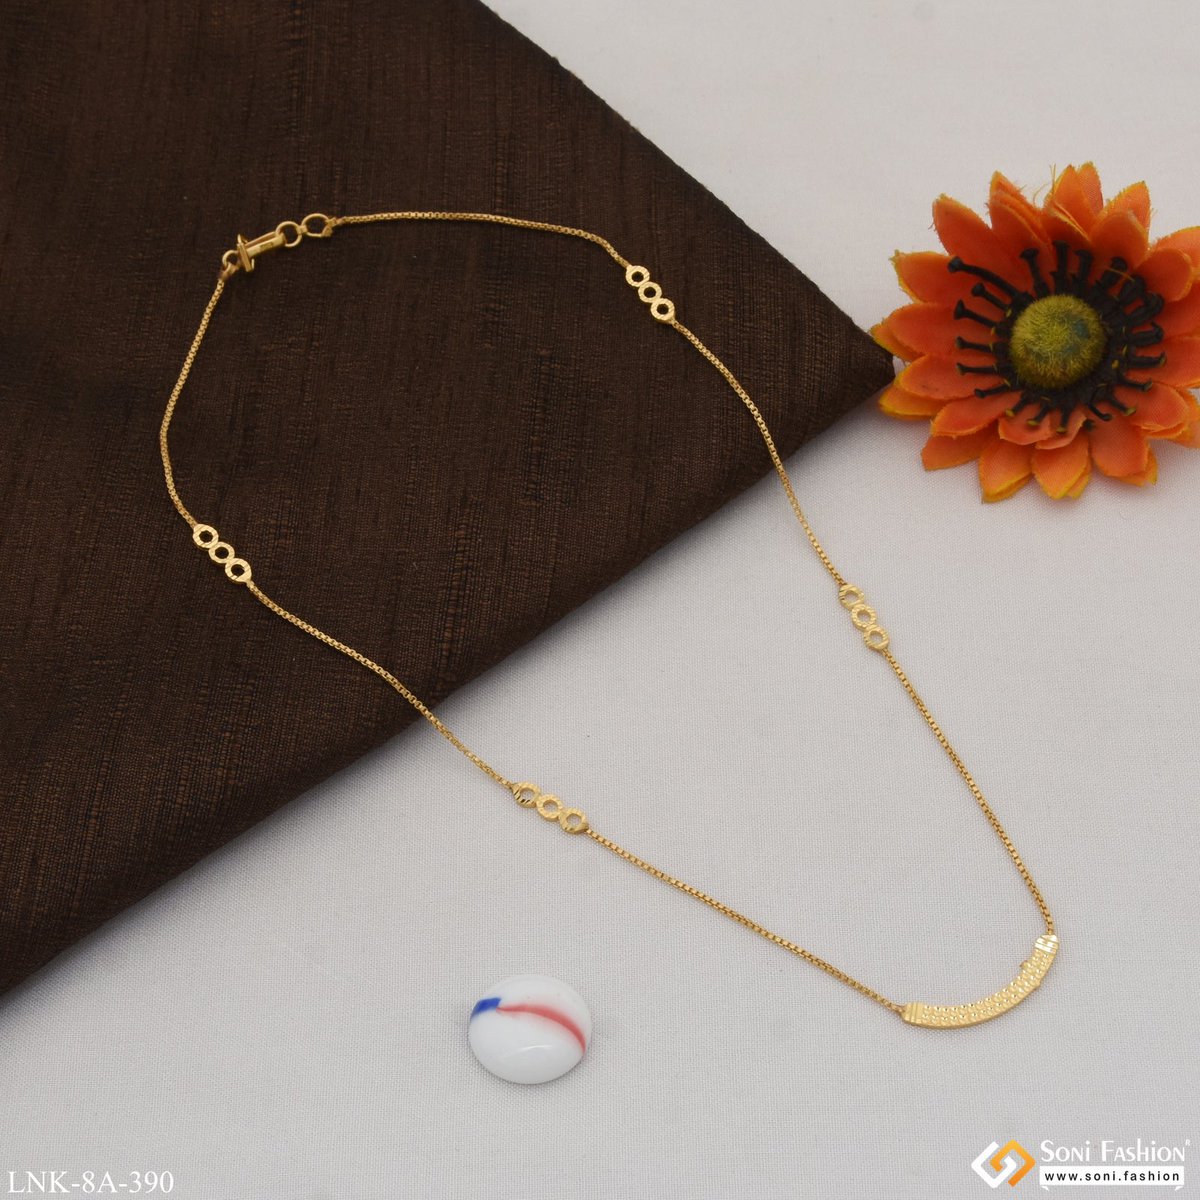 Sleek sellouts! 🤓. Order Brilliant Design Magnificent Design Gold Plated Chain for Ladies - Style A390 at ₹875.50 from bit.ly/4aQoq75 #1gramgoldforming #goldplated